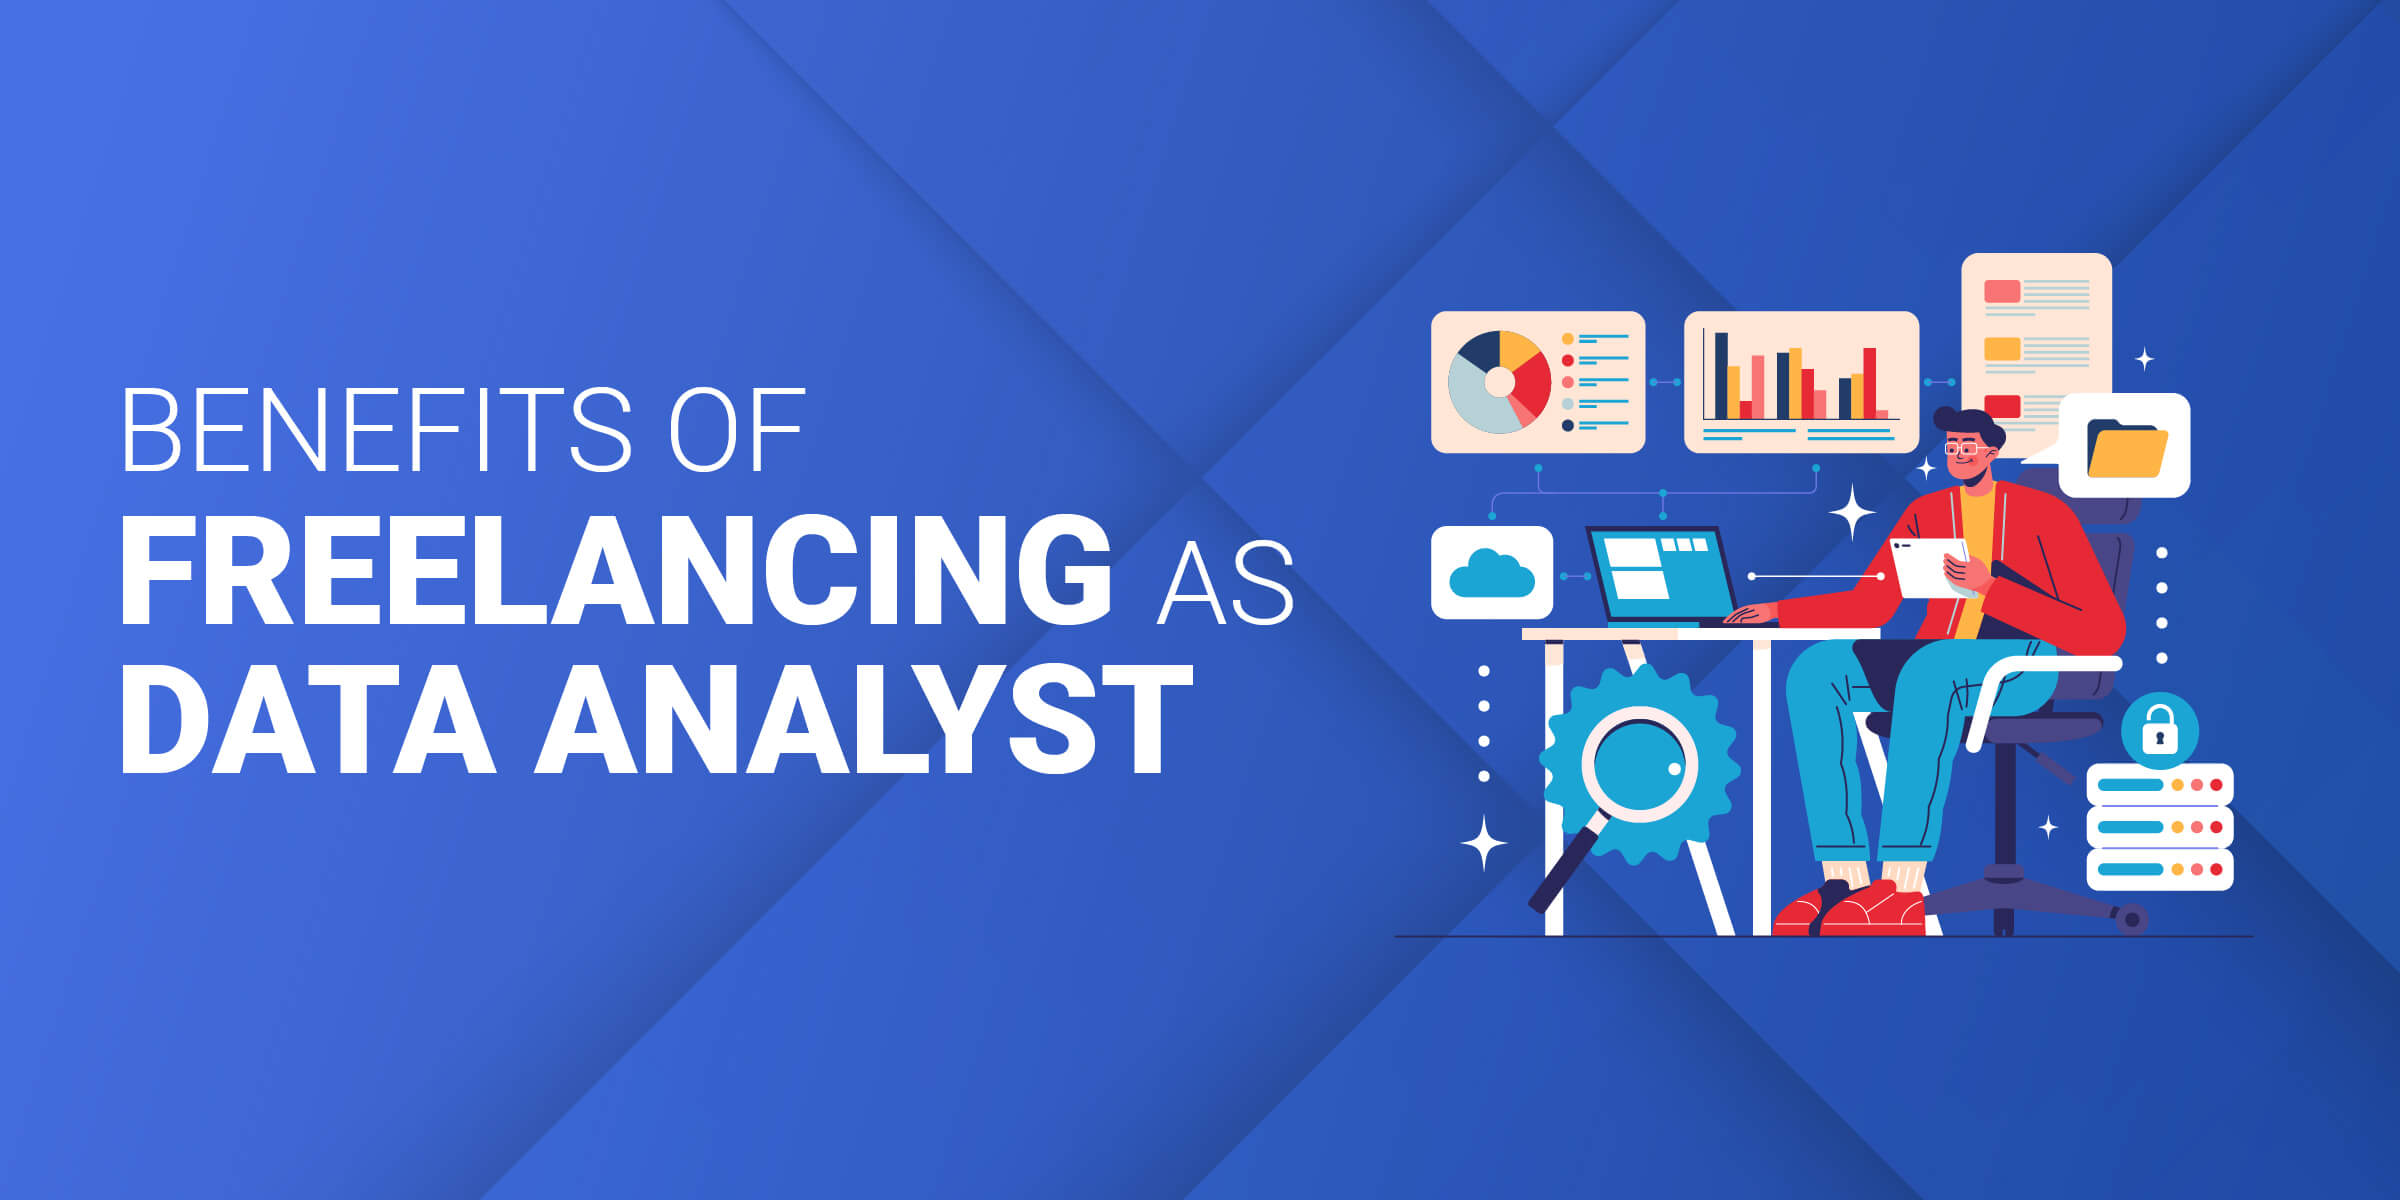 Benefits of Freelancing as Data Analyst